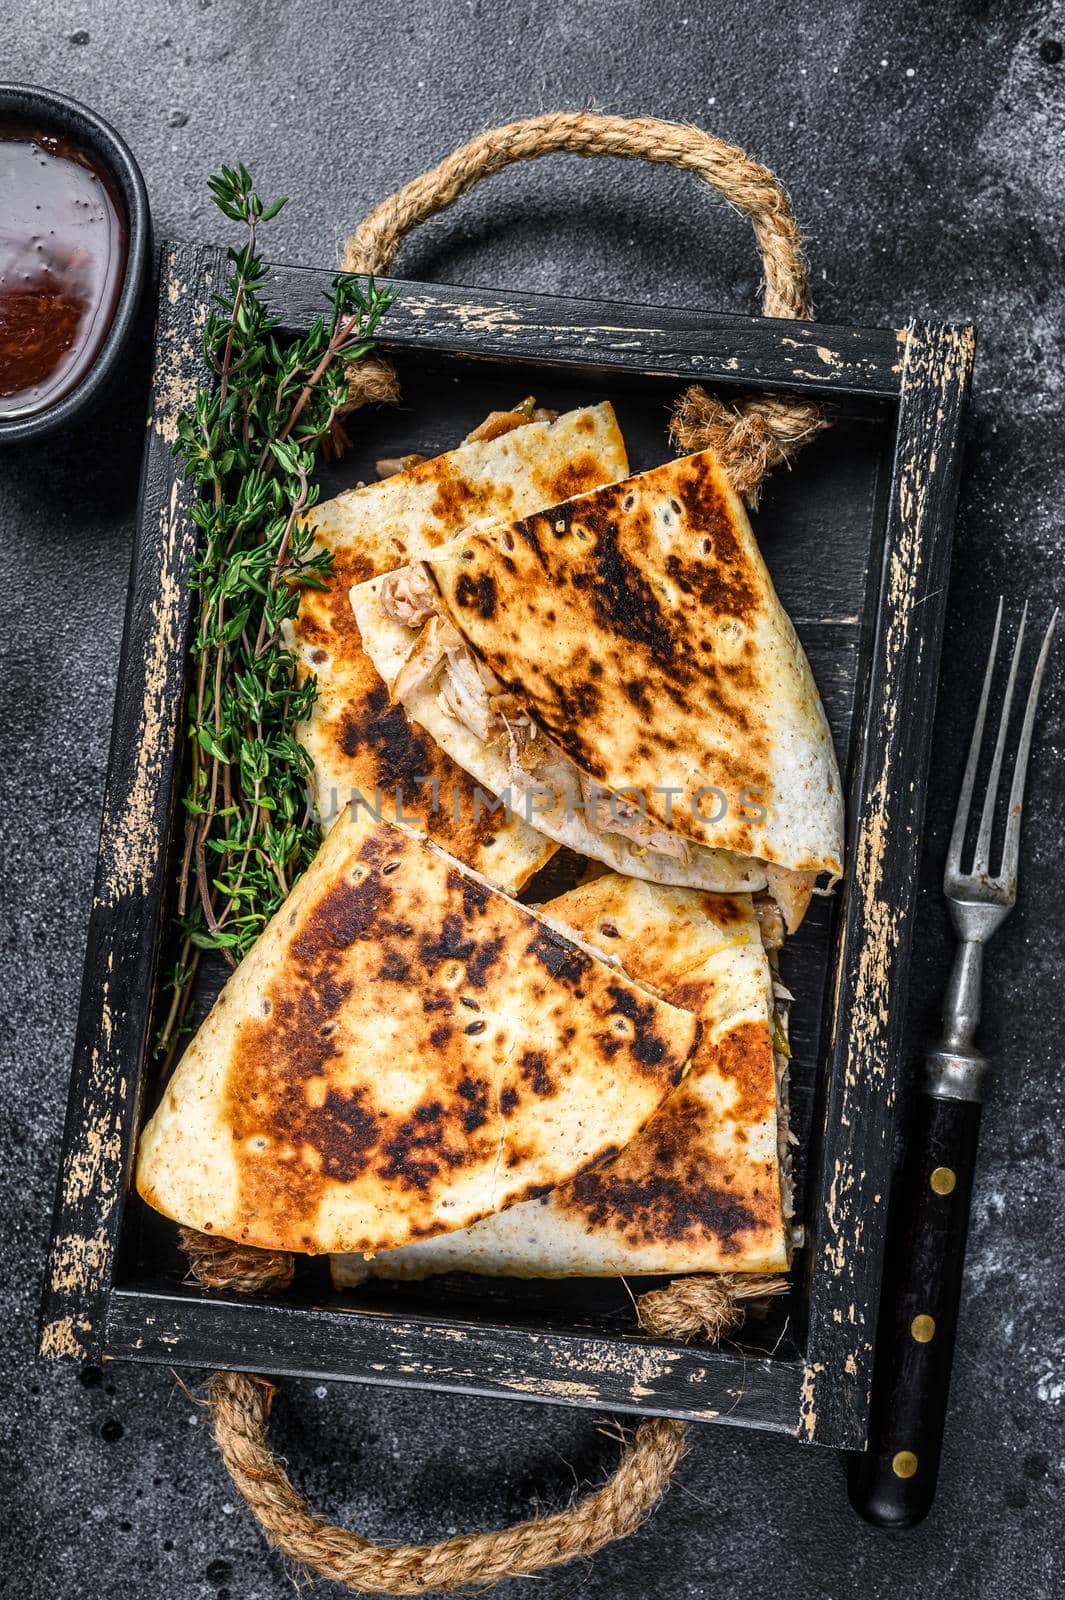 Mexican quesadilla with chicken, tomato, corn and cheese. Black background. Top view.